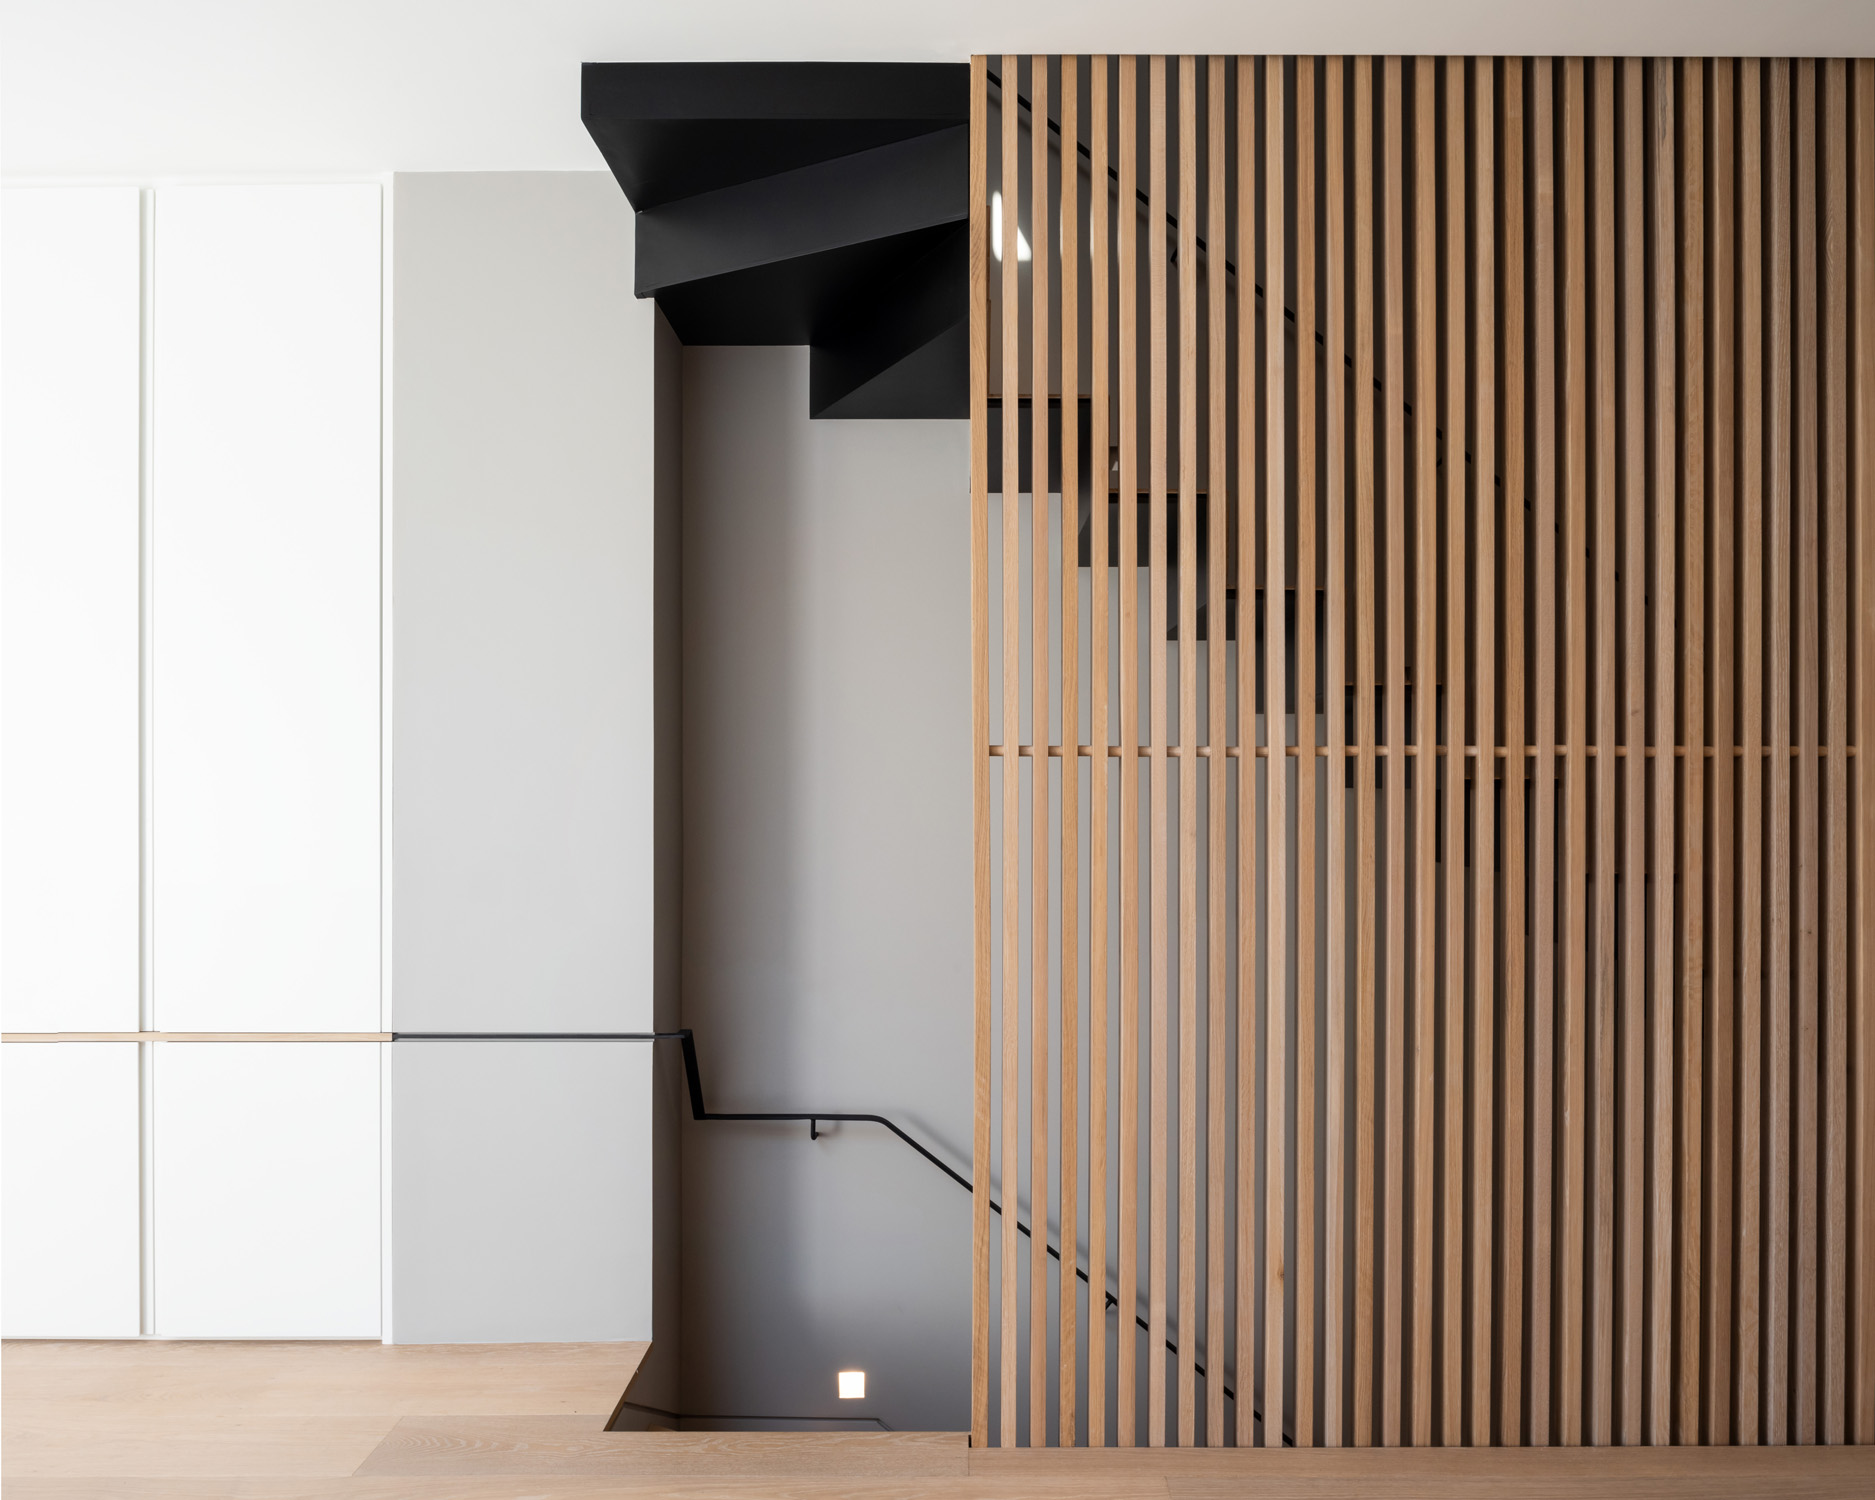 Staircase by Tigg + Coll Architects